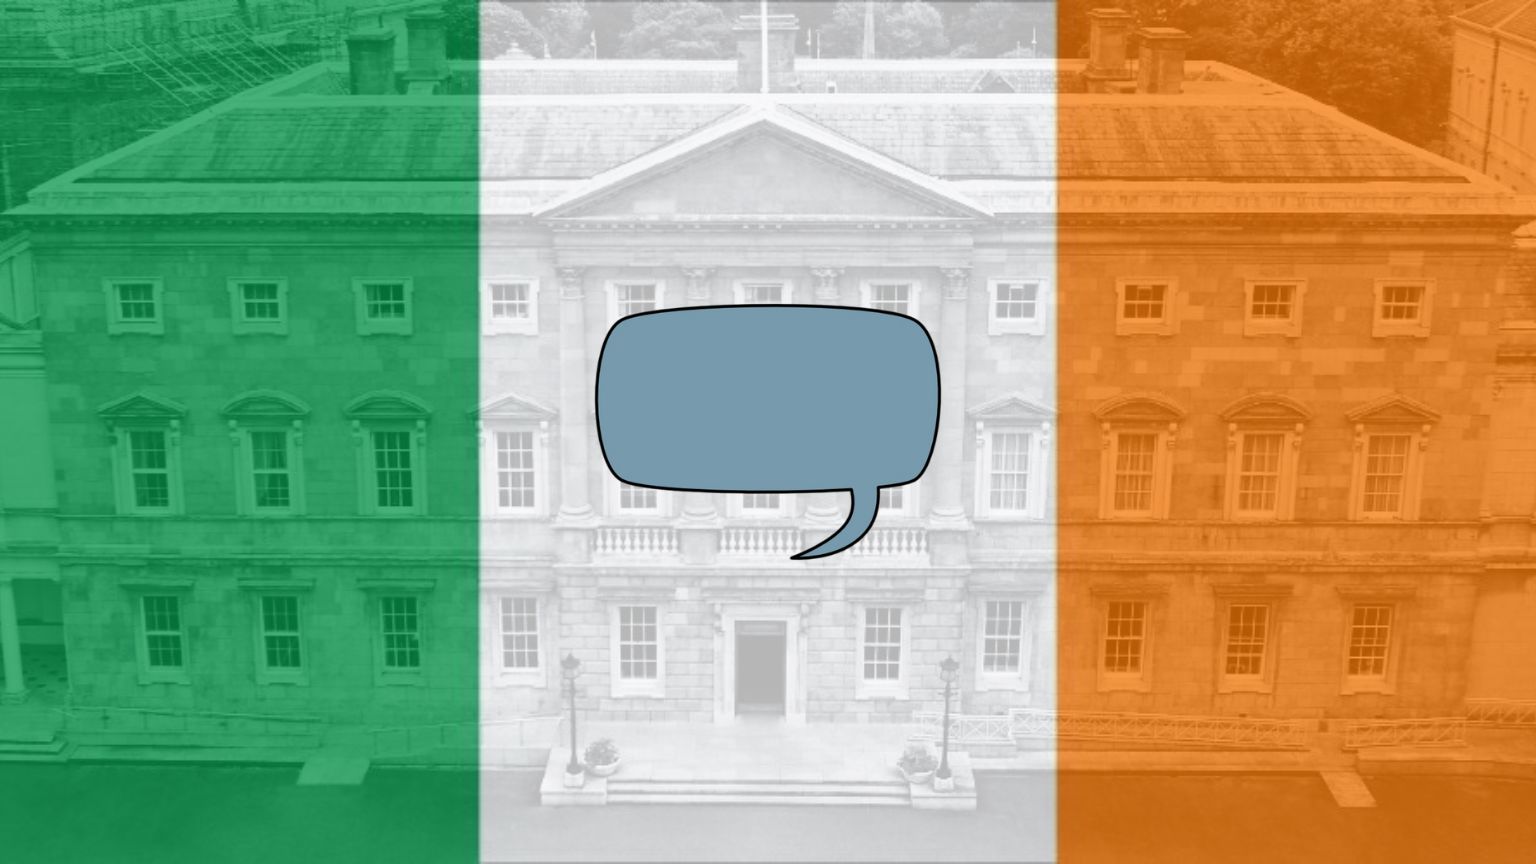 Ireland wanted public input on proposed censorship bill…Until the majority said they actually prefer free speech.